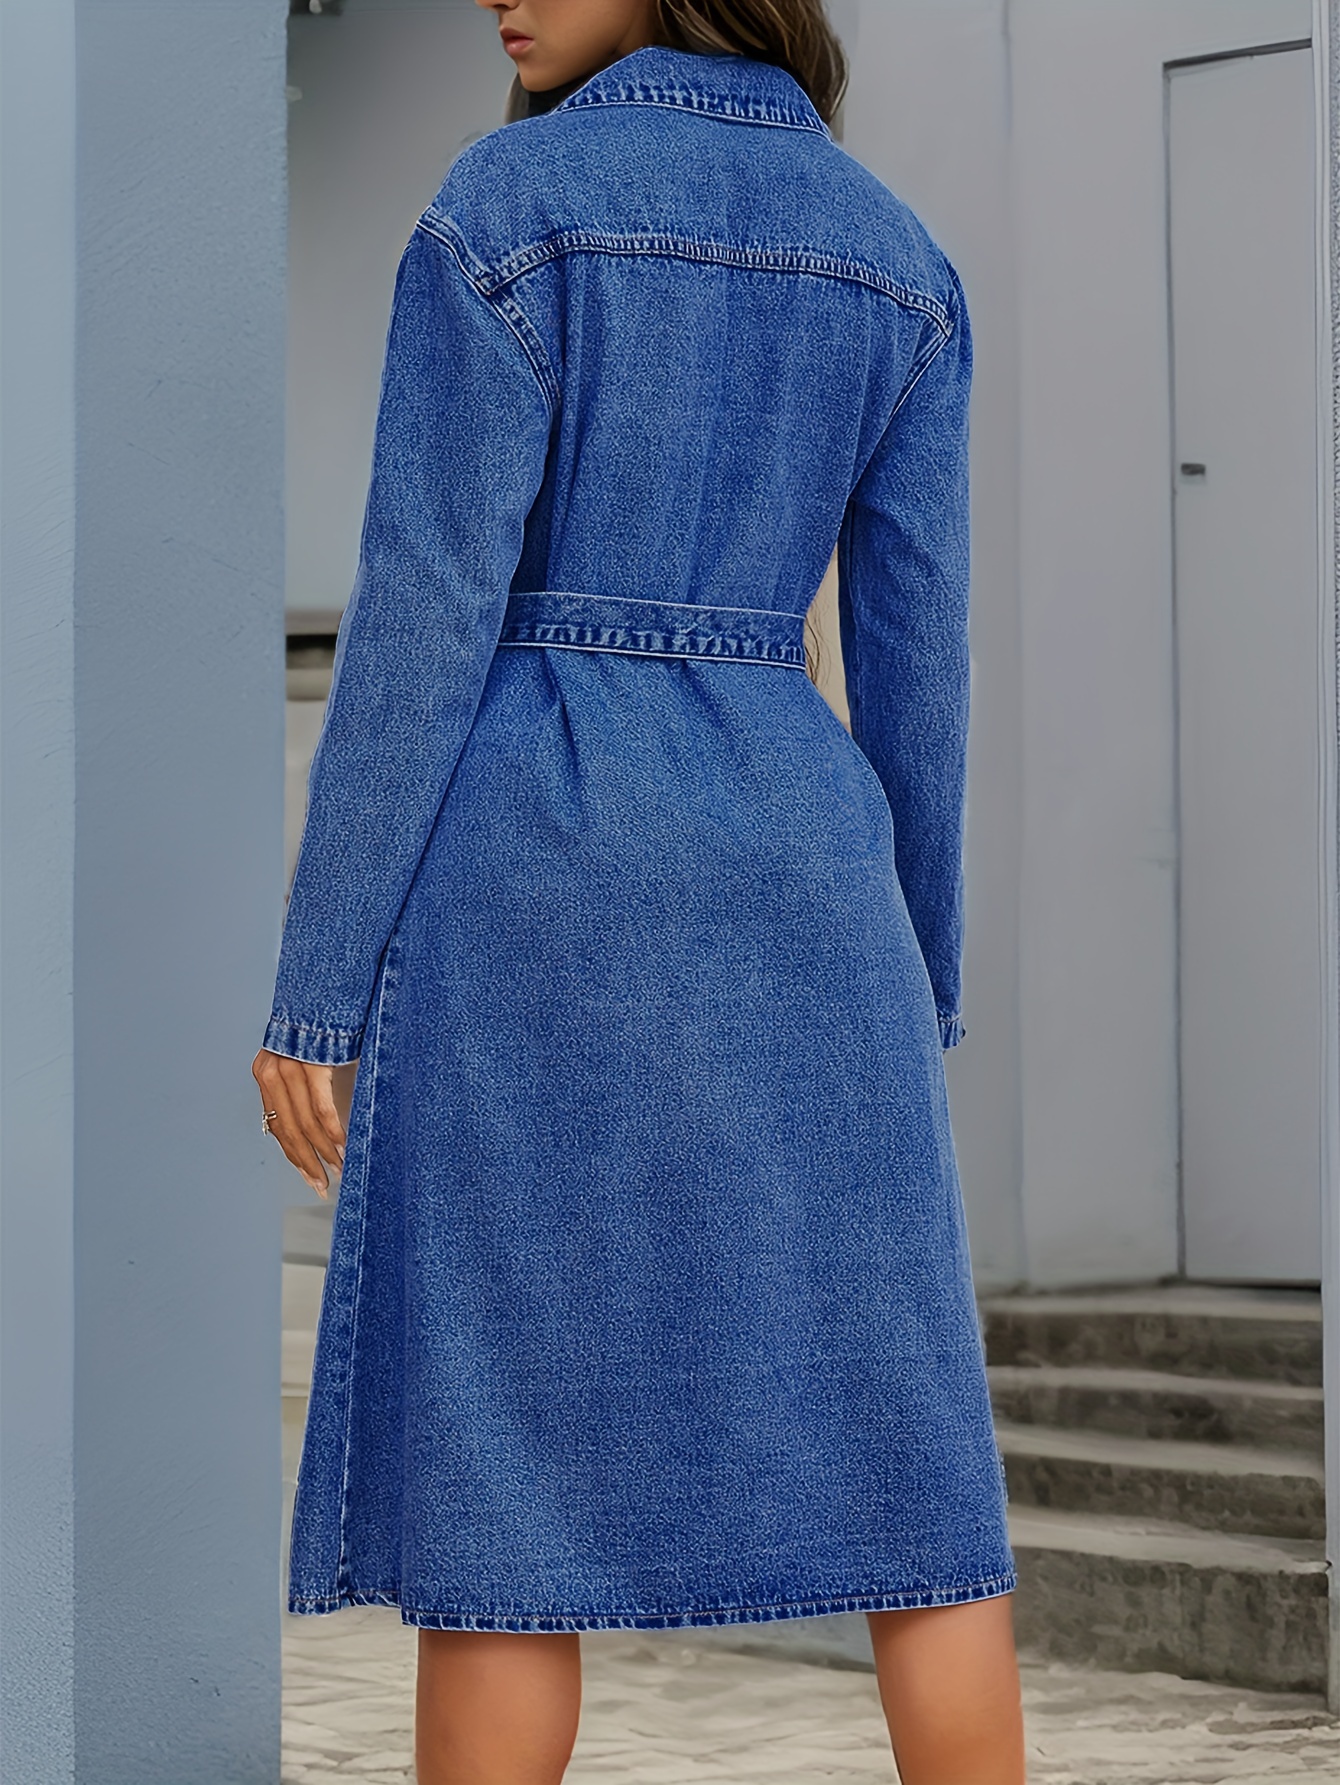 Hemming Tape For Dresses Nude Dress For Women Wedding Dress For s Dress  Party Tunic Dress With Pockets Collared Dress For Women Denim Dress For s  Fall